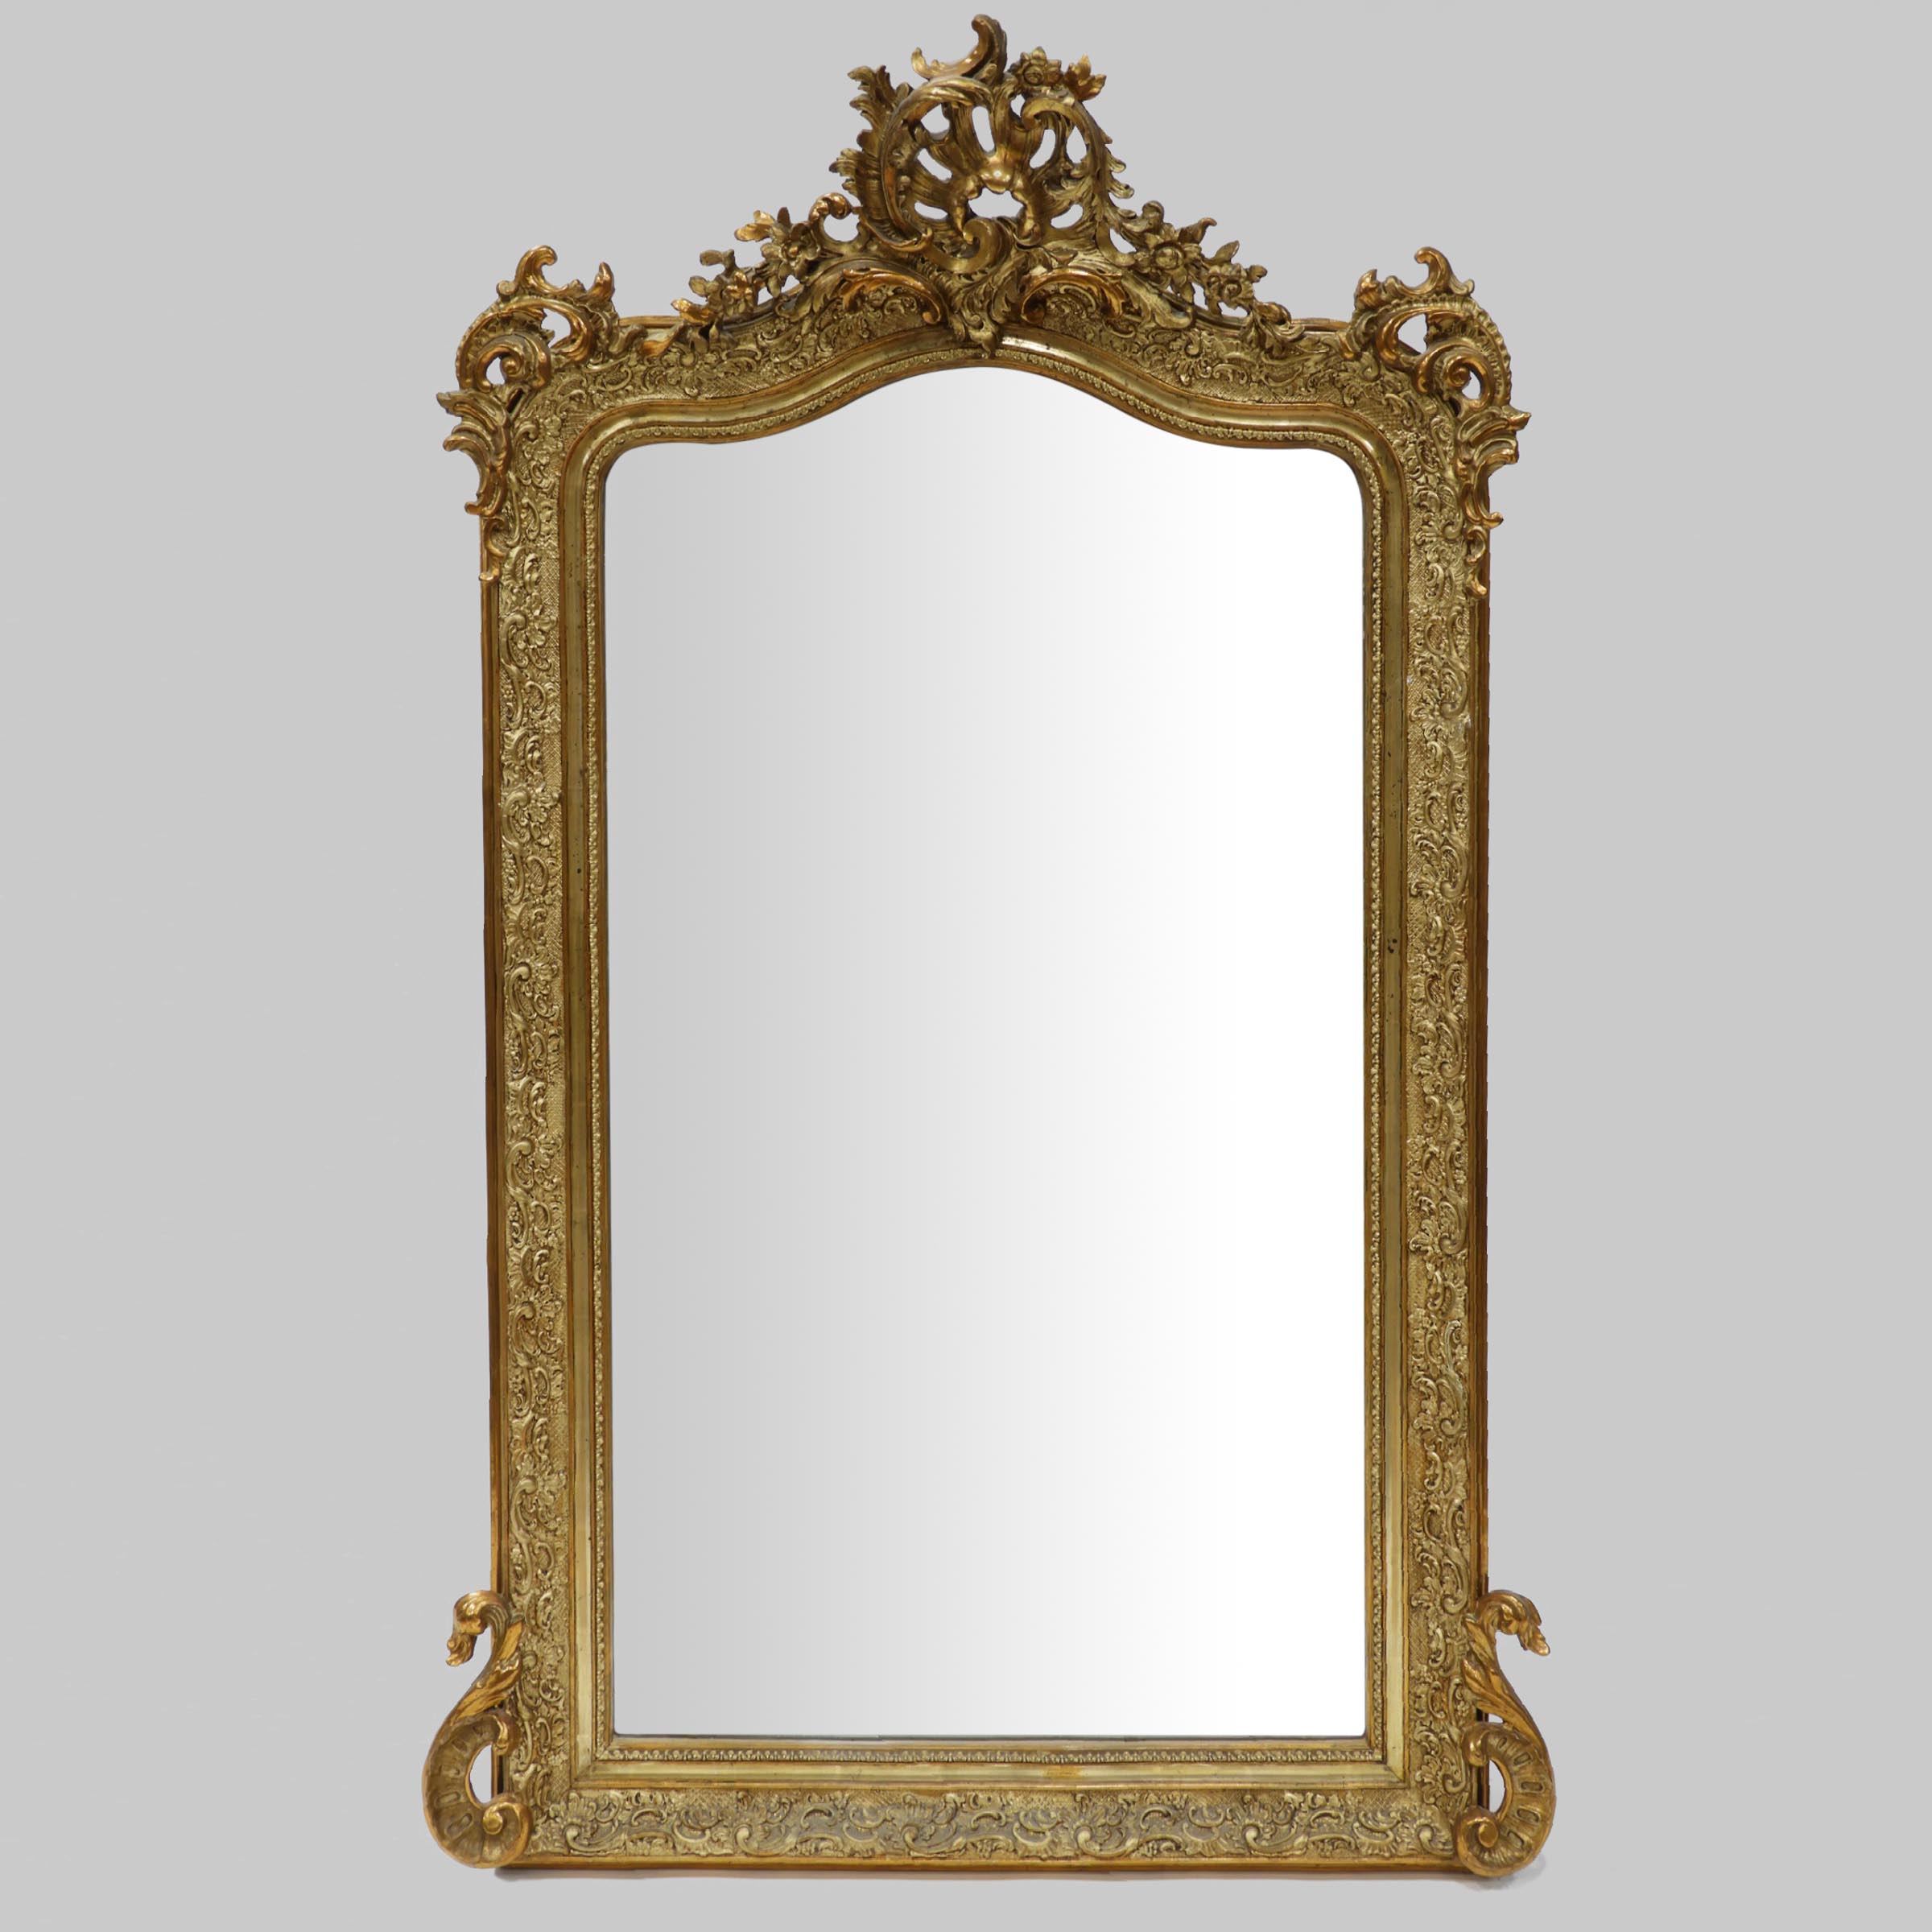 Rococo Revival Giltwood Over Mantle Mirror, late 19th century